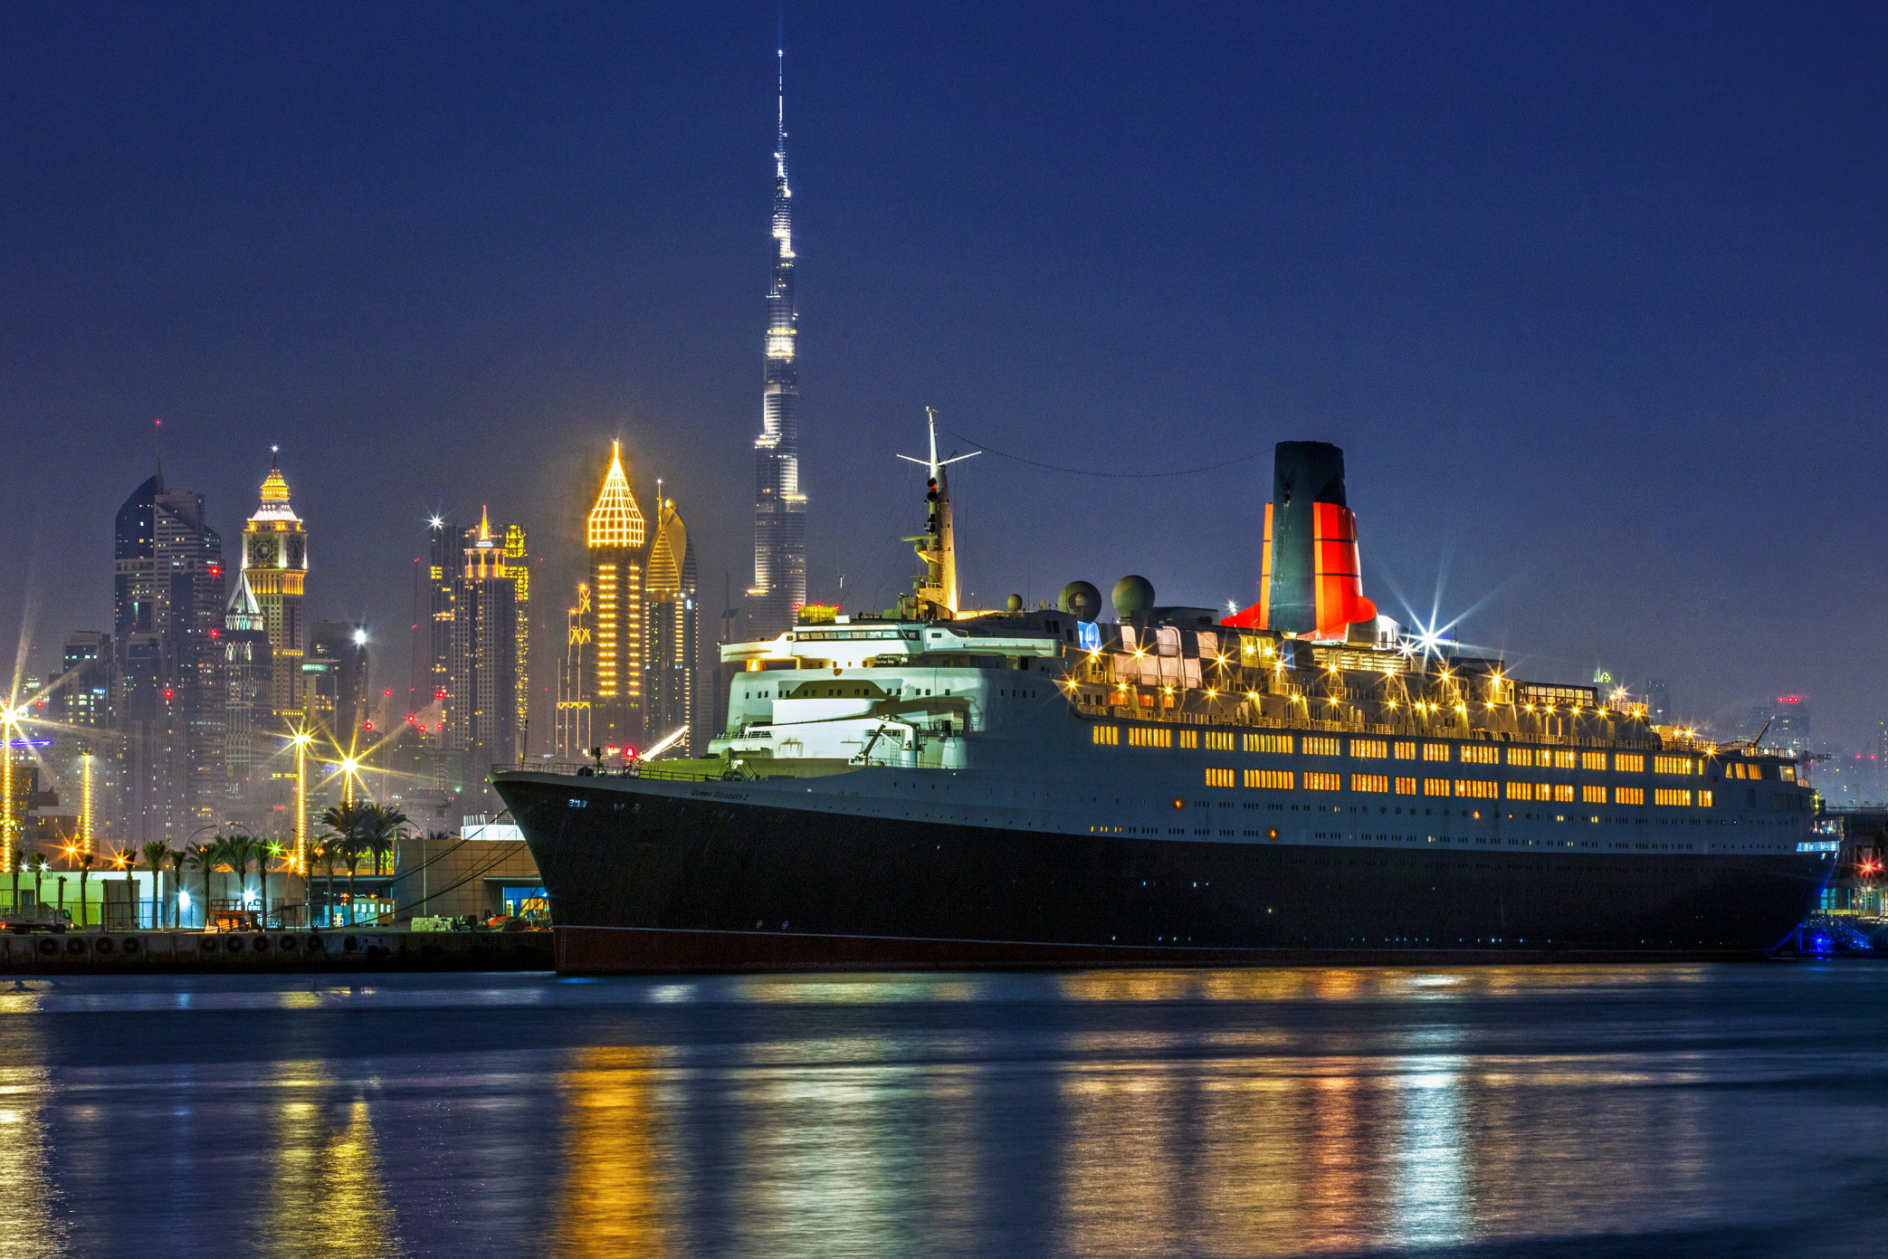 The Queen Elizabeth 2 floating hotel is managed by Accor and has been in Dubai for 15 years. Click to enlarge.